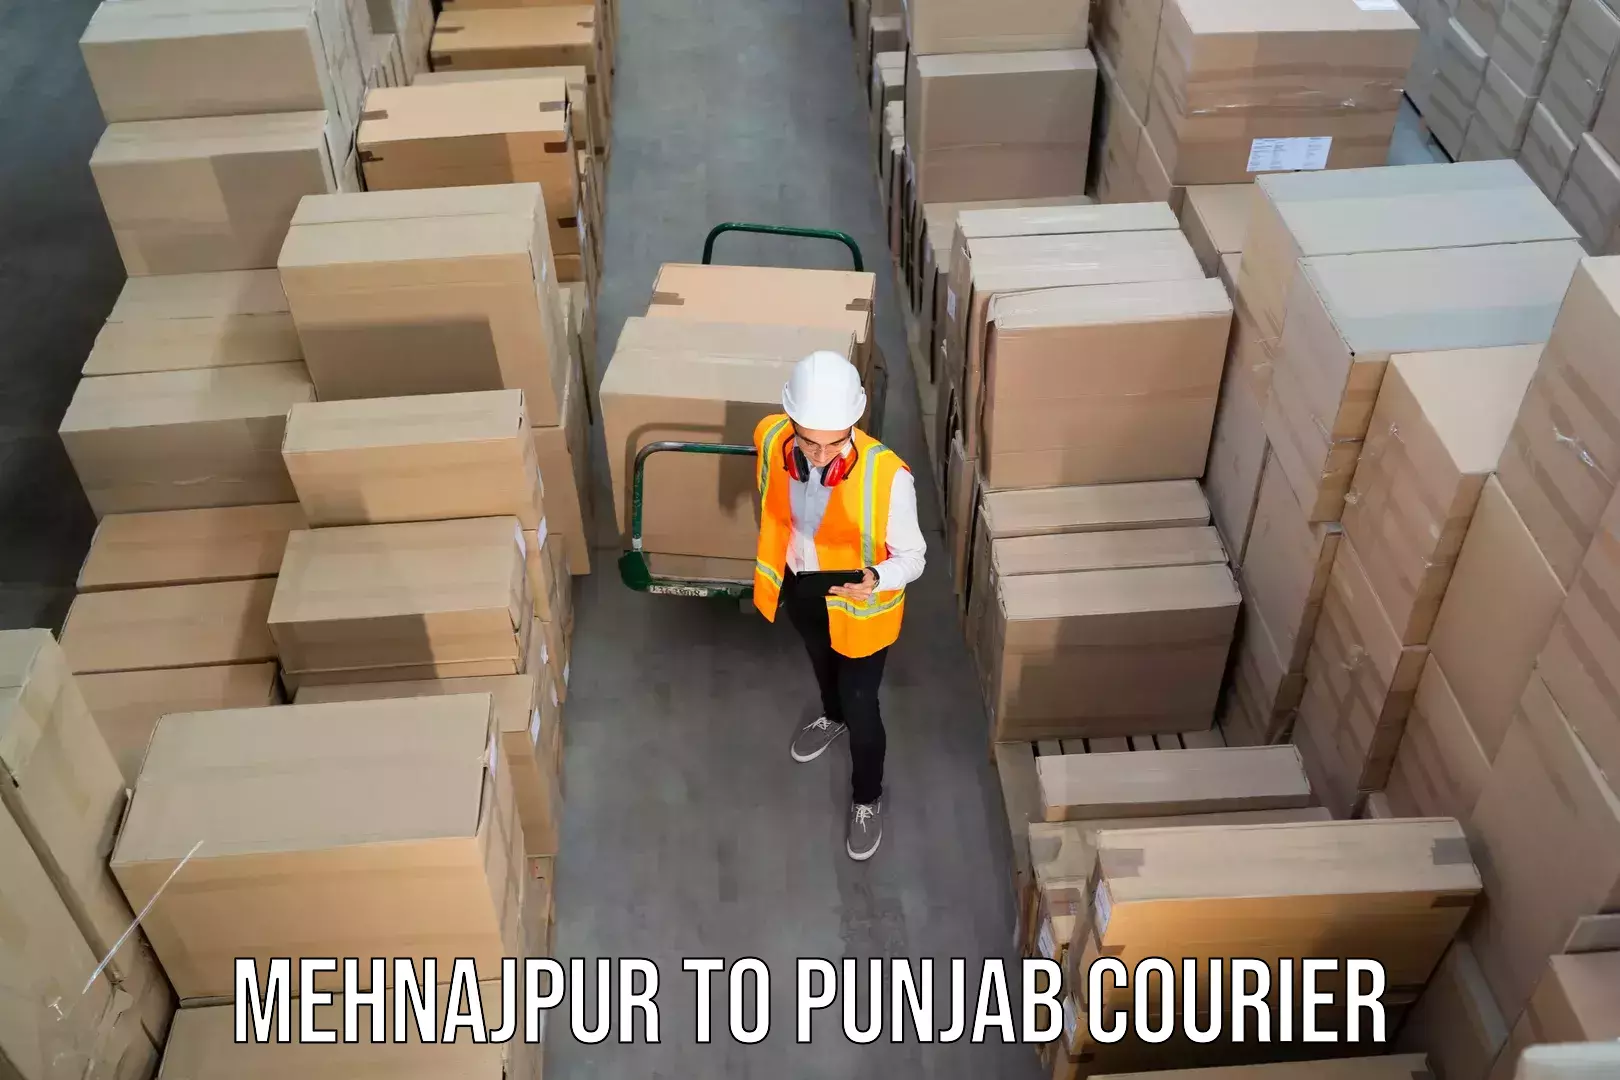 Professional courier handling Mehnajpur to Jagraon